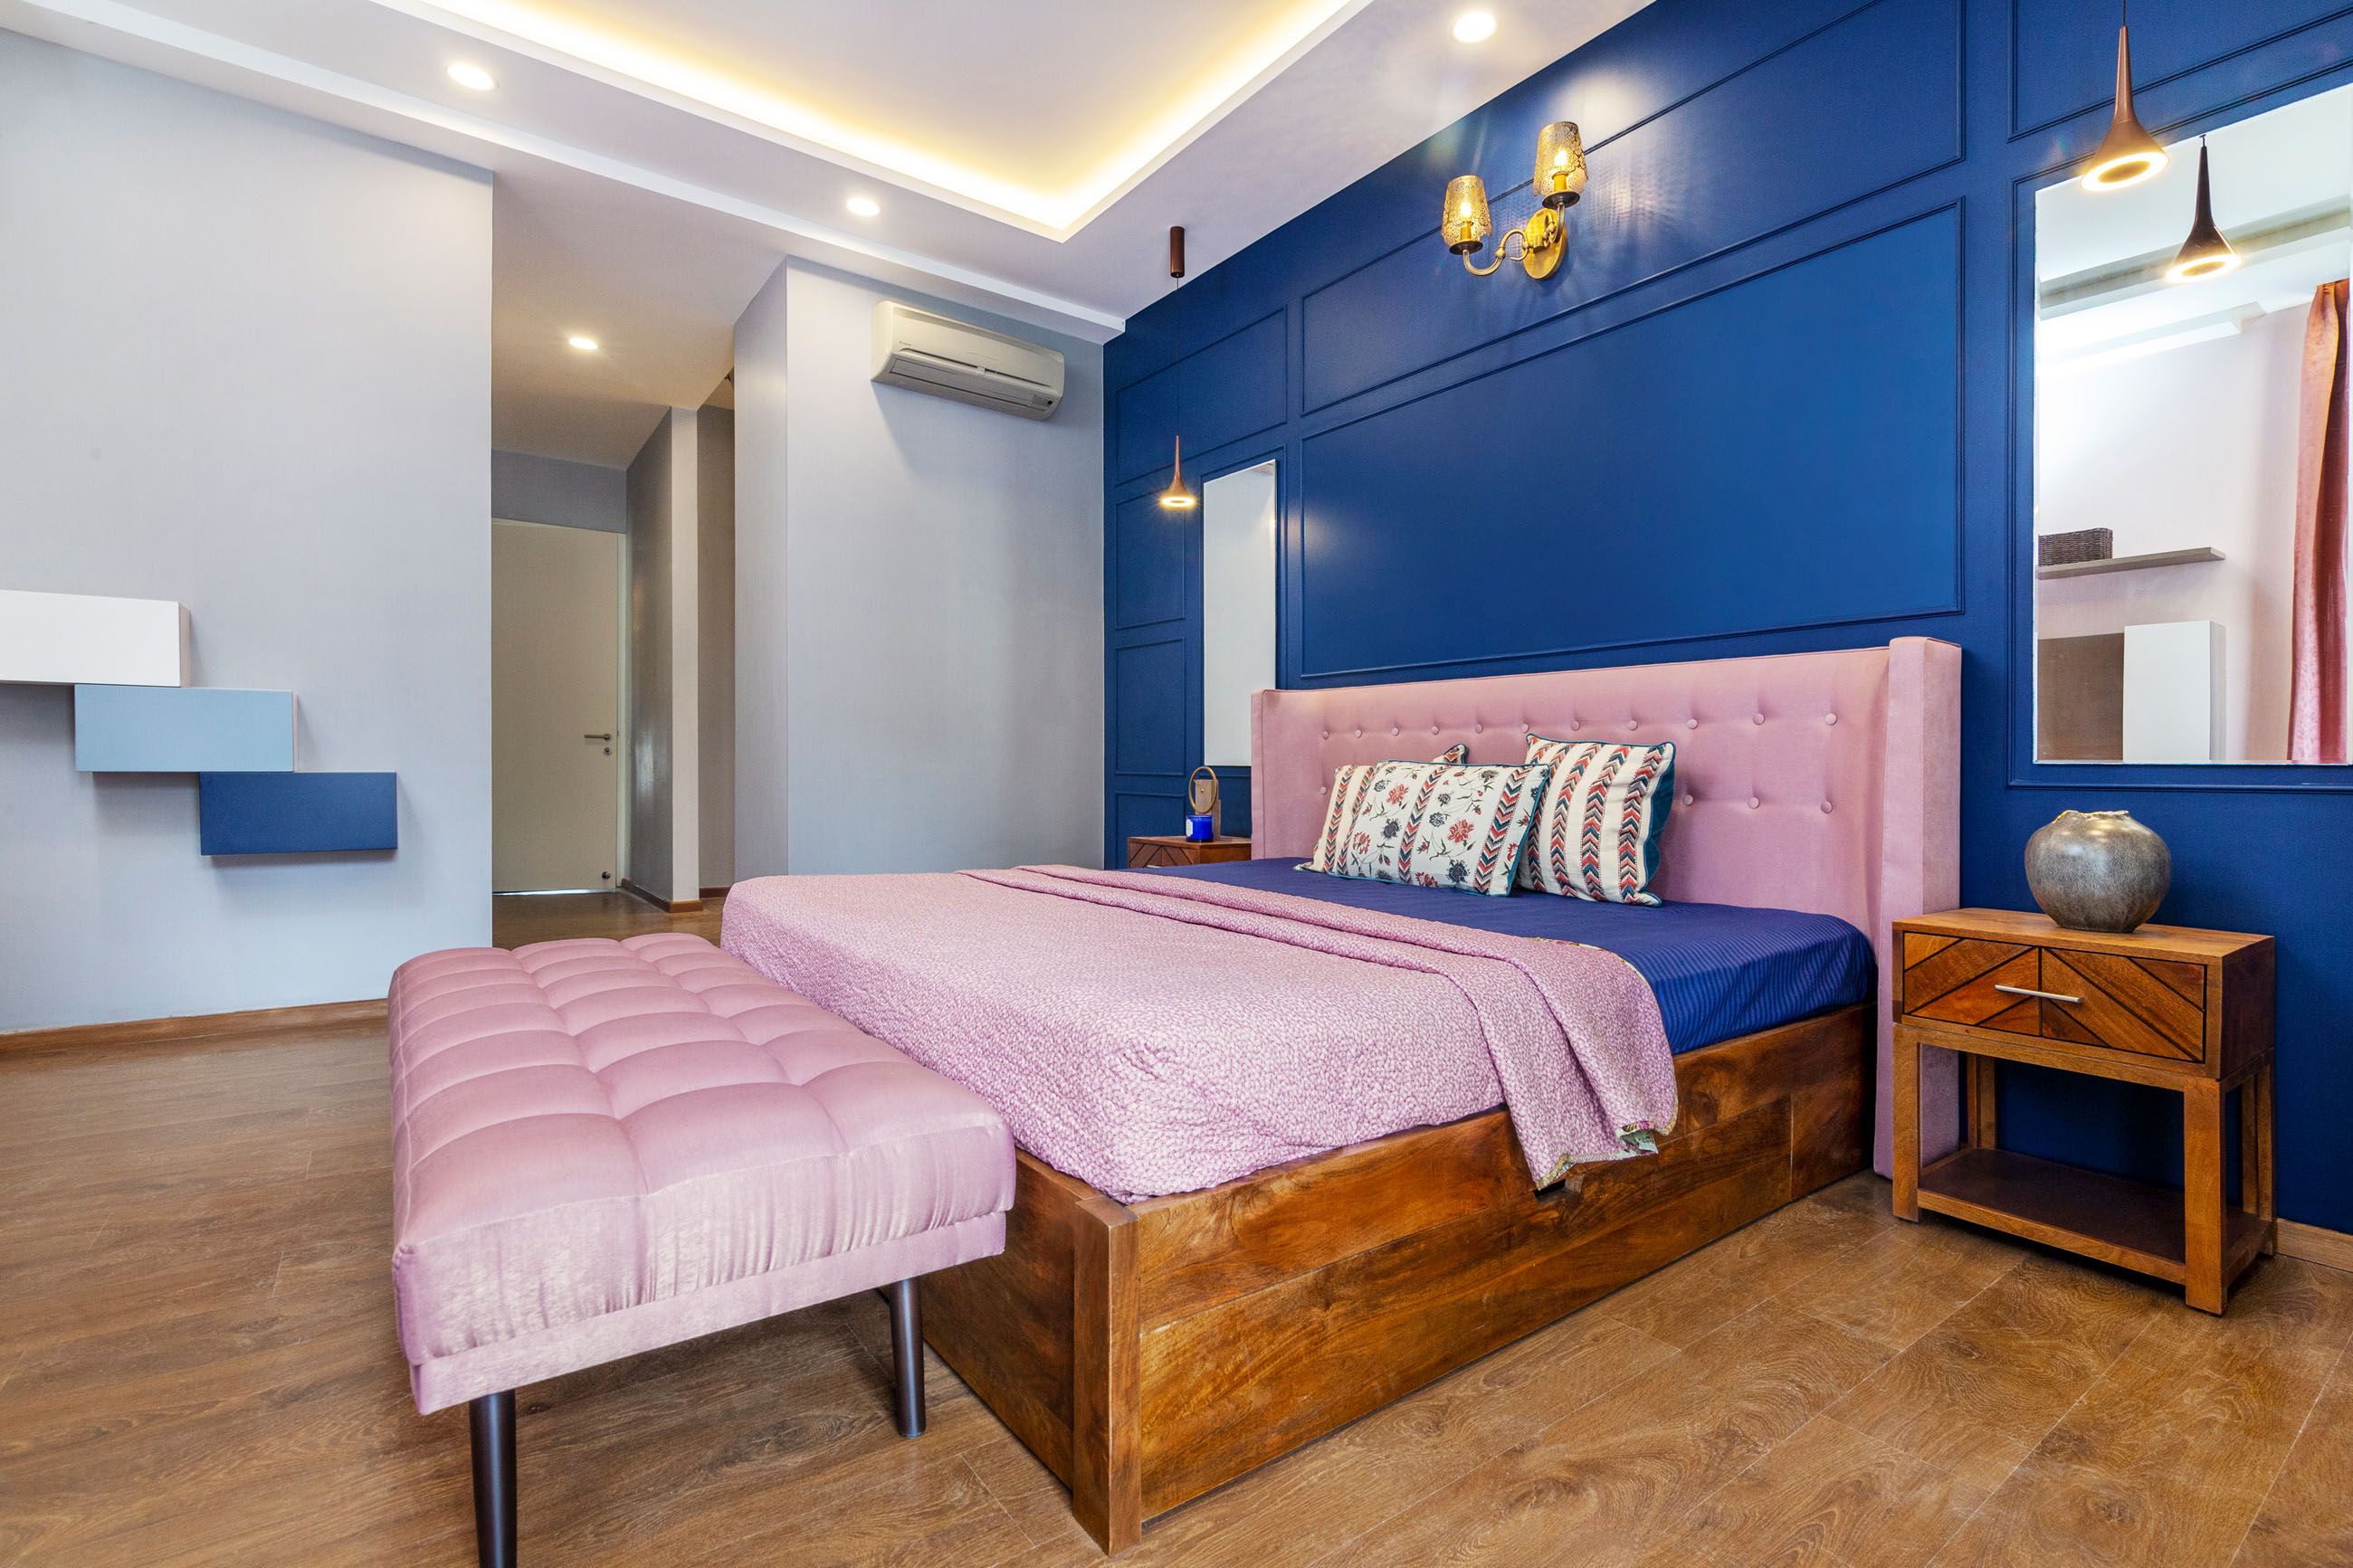 Contemporary Blue And Pink Master Bedroom Design With Pink Seater